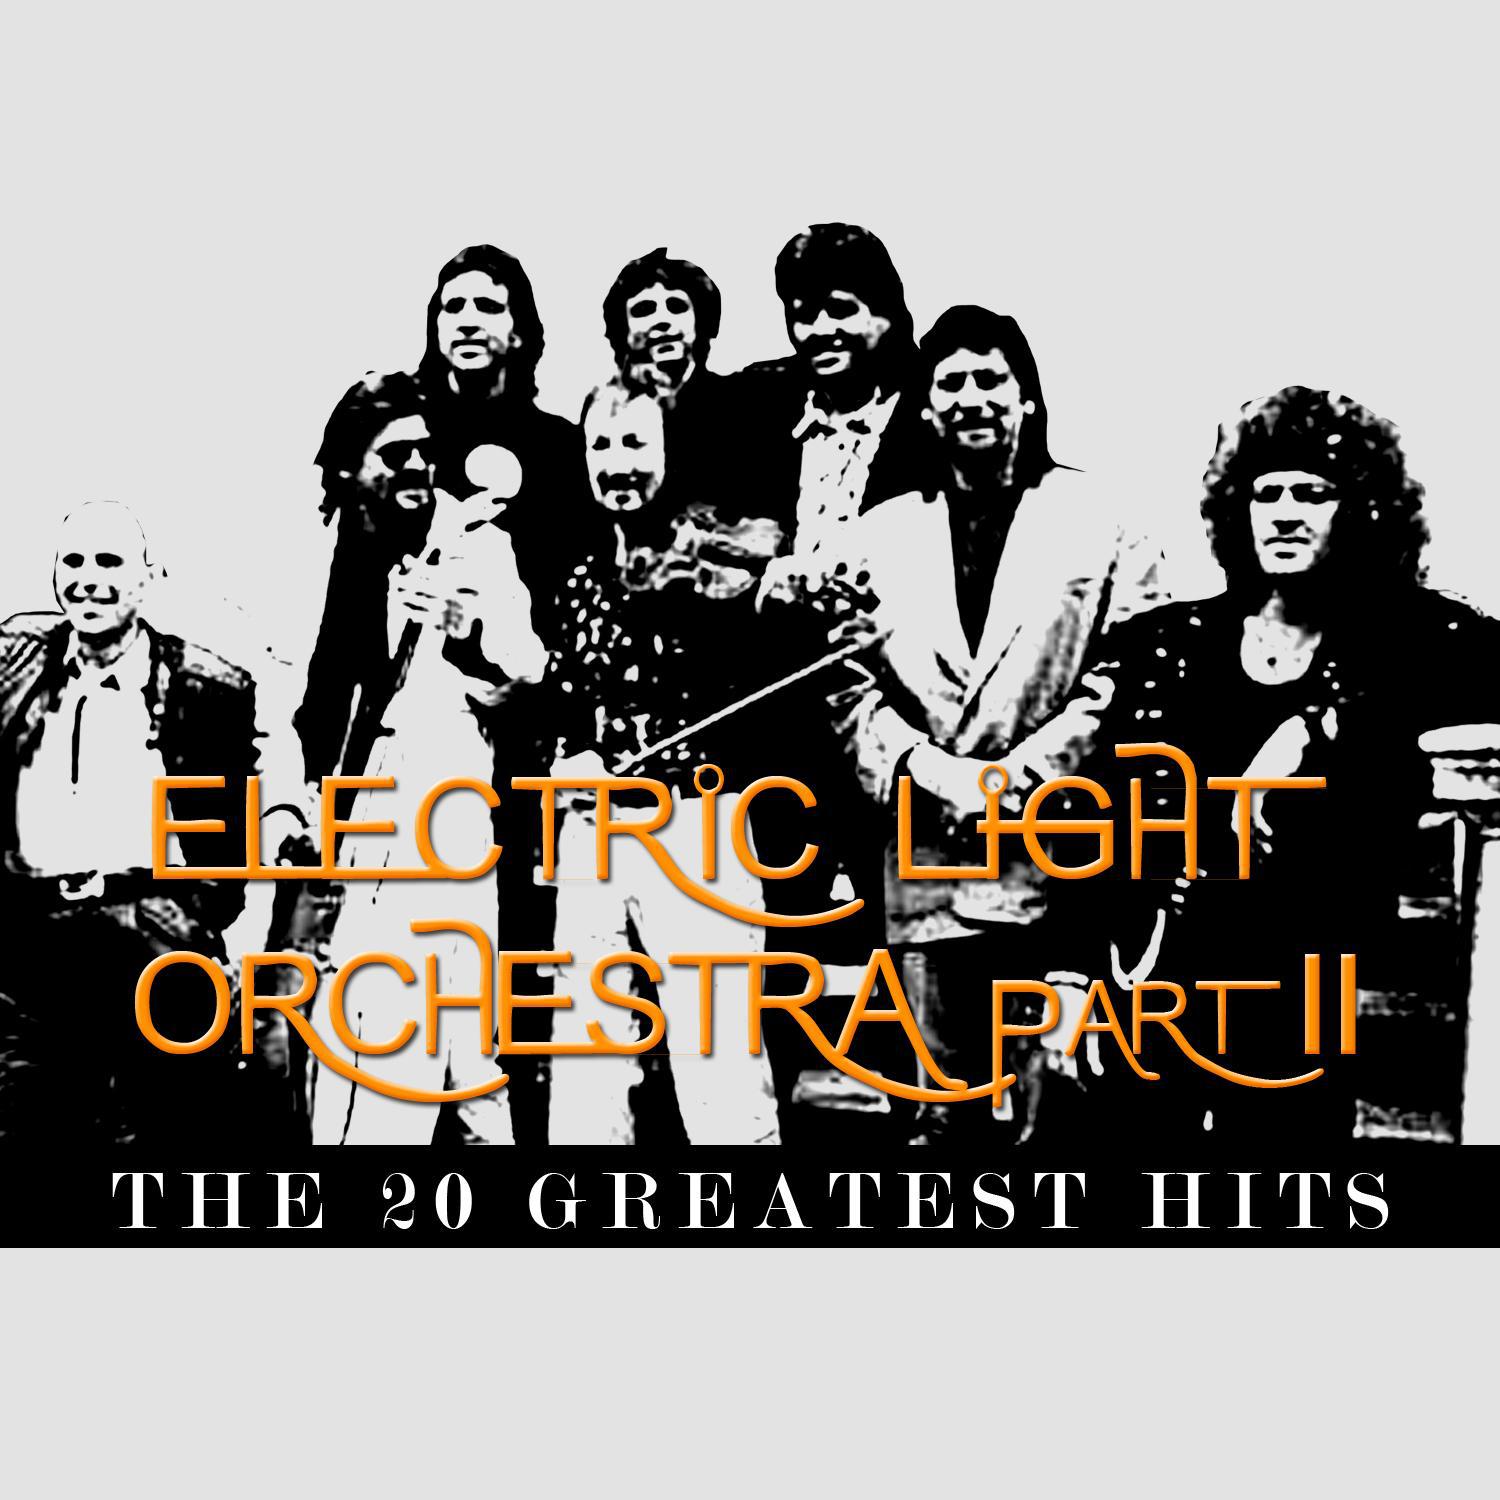 Electric Light Orchestra Part II - The 20 Greatest Hits